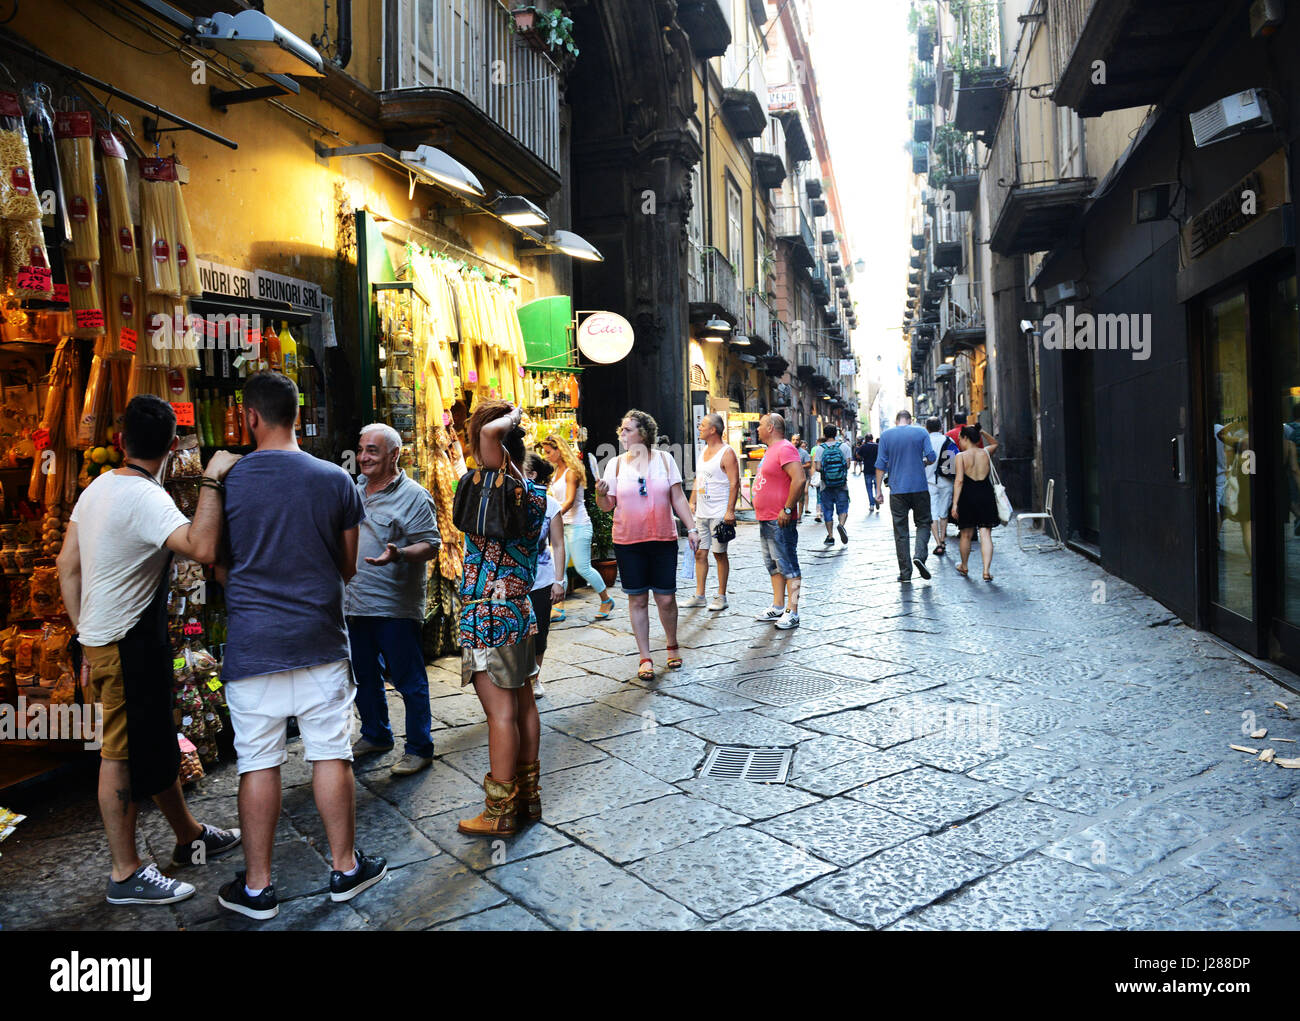 The old city of Napoli Stock Photo